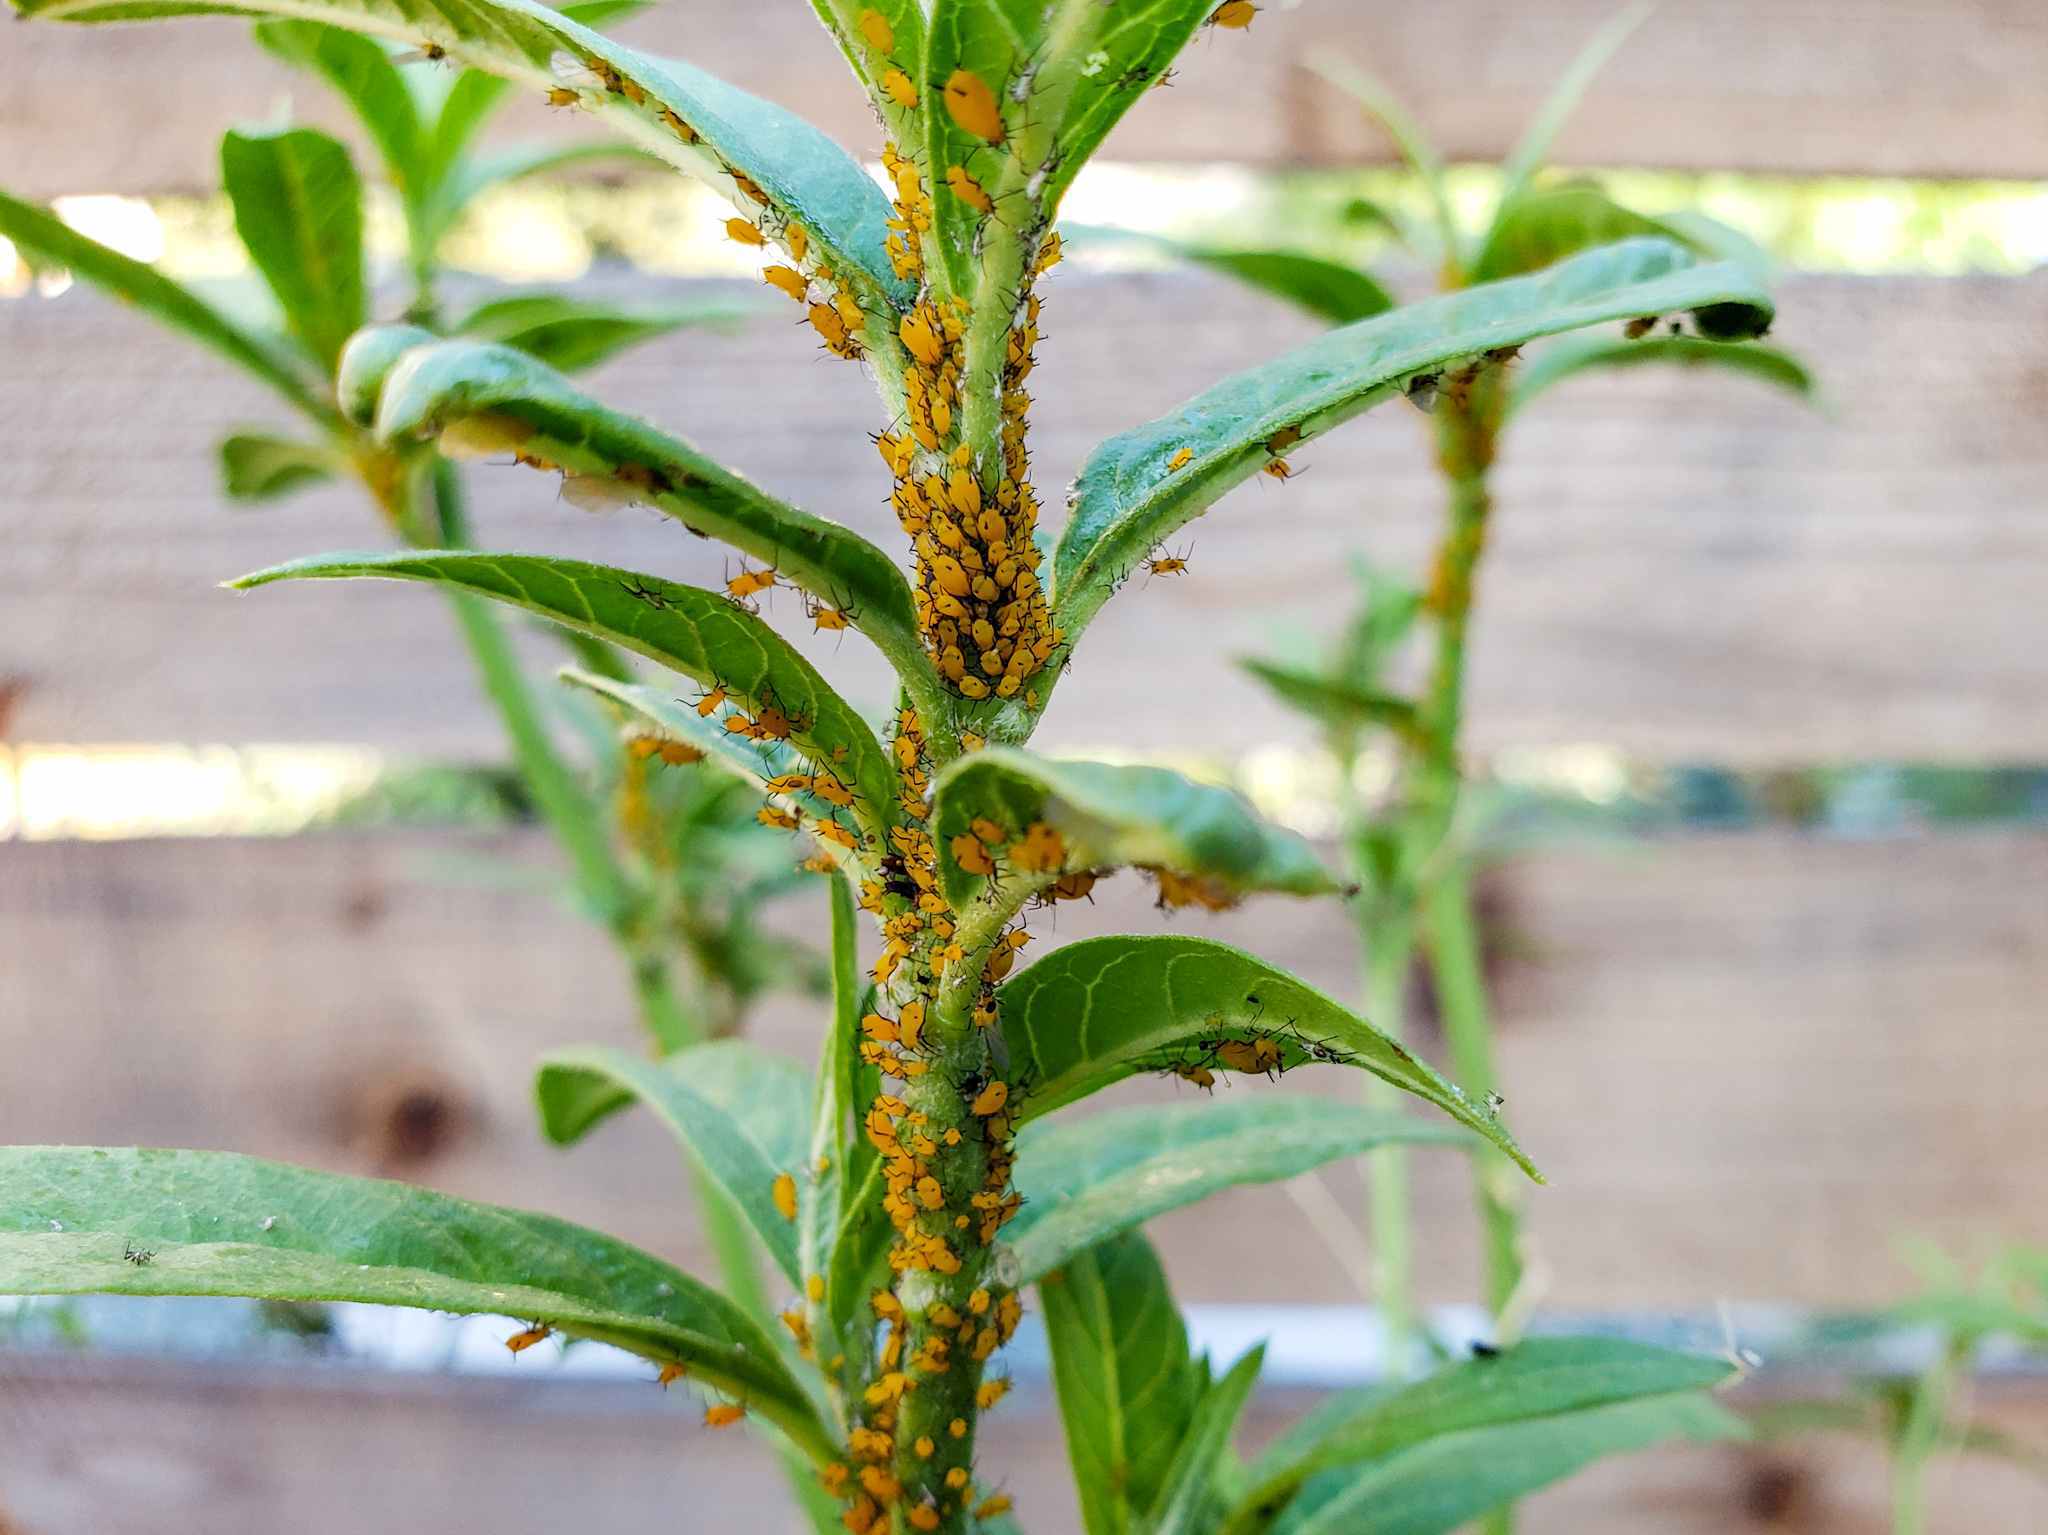 A top portion of a tropical milkweed plant is shown with two additional branches blurred out in the background behind the branch in focus. The branches are covered in orange aphids, some of them packed tightly together like corn kernels on an ear of corn. Little black specks which are their legs are visible amongst the orange bodies. There is a horizontal fence that is the backdrop. 